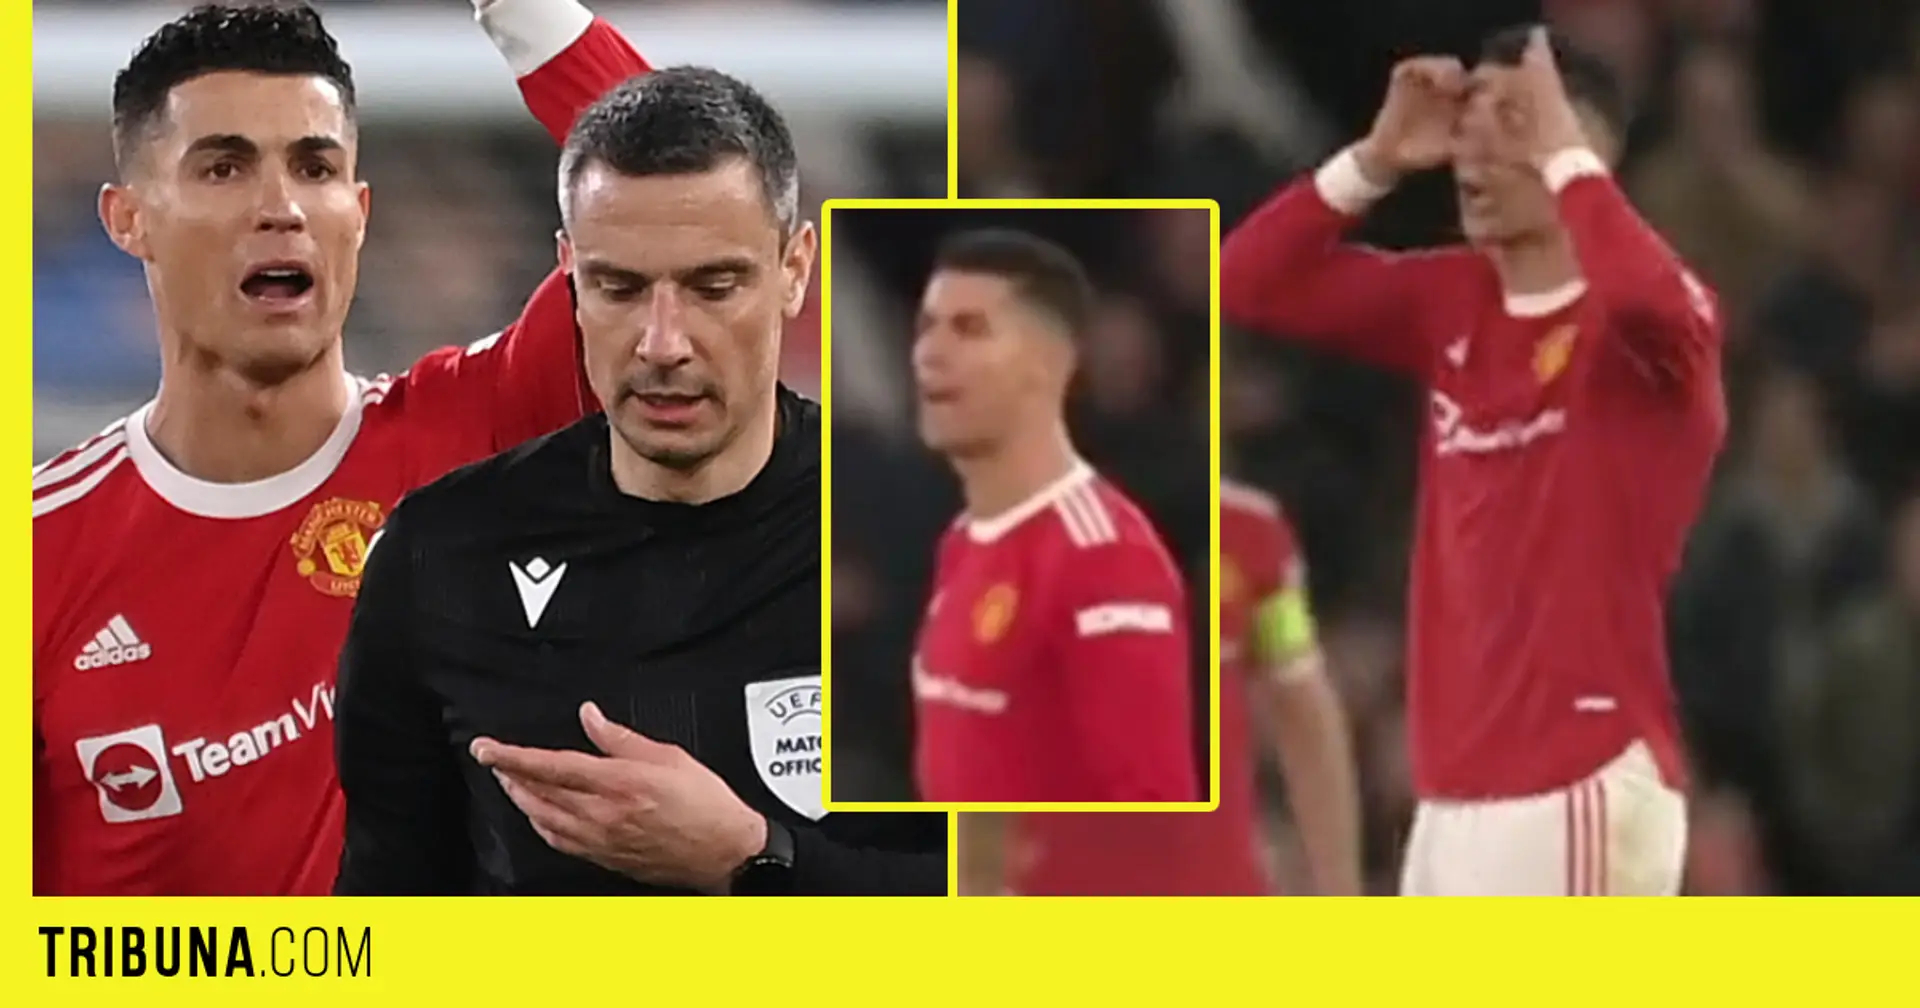 Cristiano Ronaldo sends furious message to referee in Atletico Madrid defeat — spotted